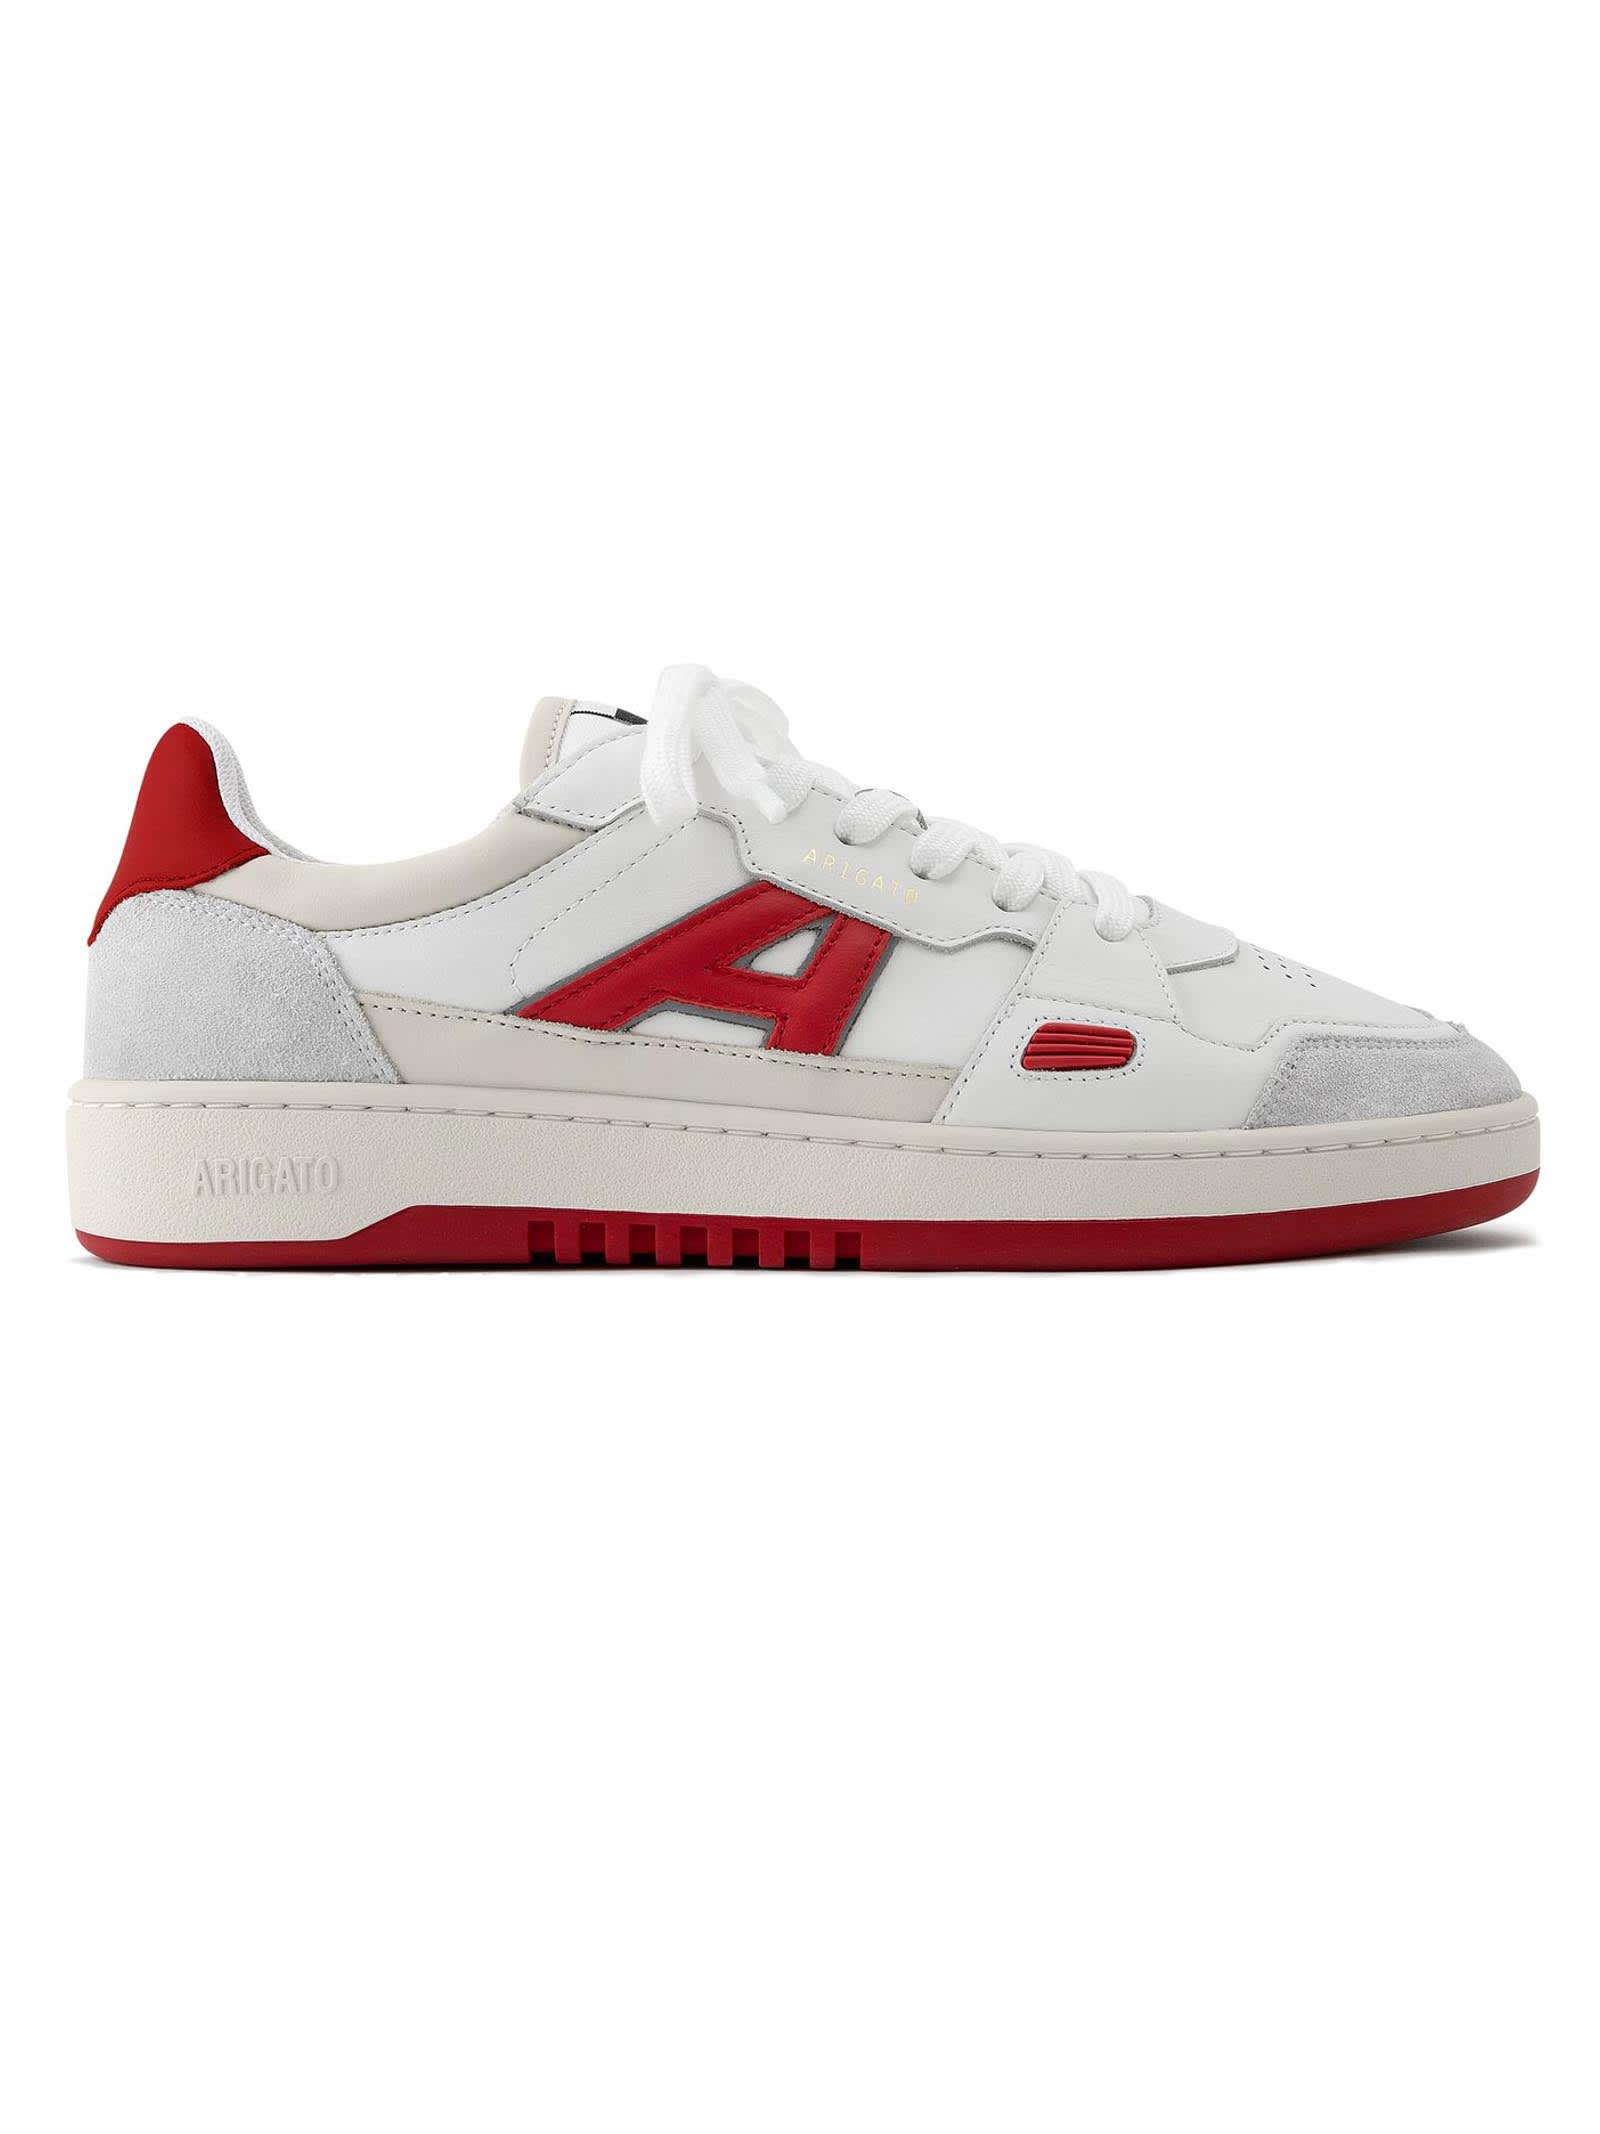 Axel Arigato White And Red A-dice Leather Sneakers